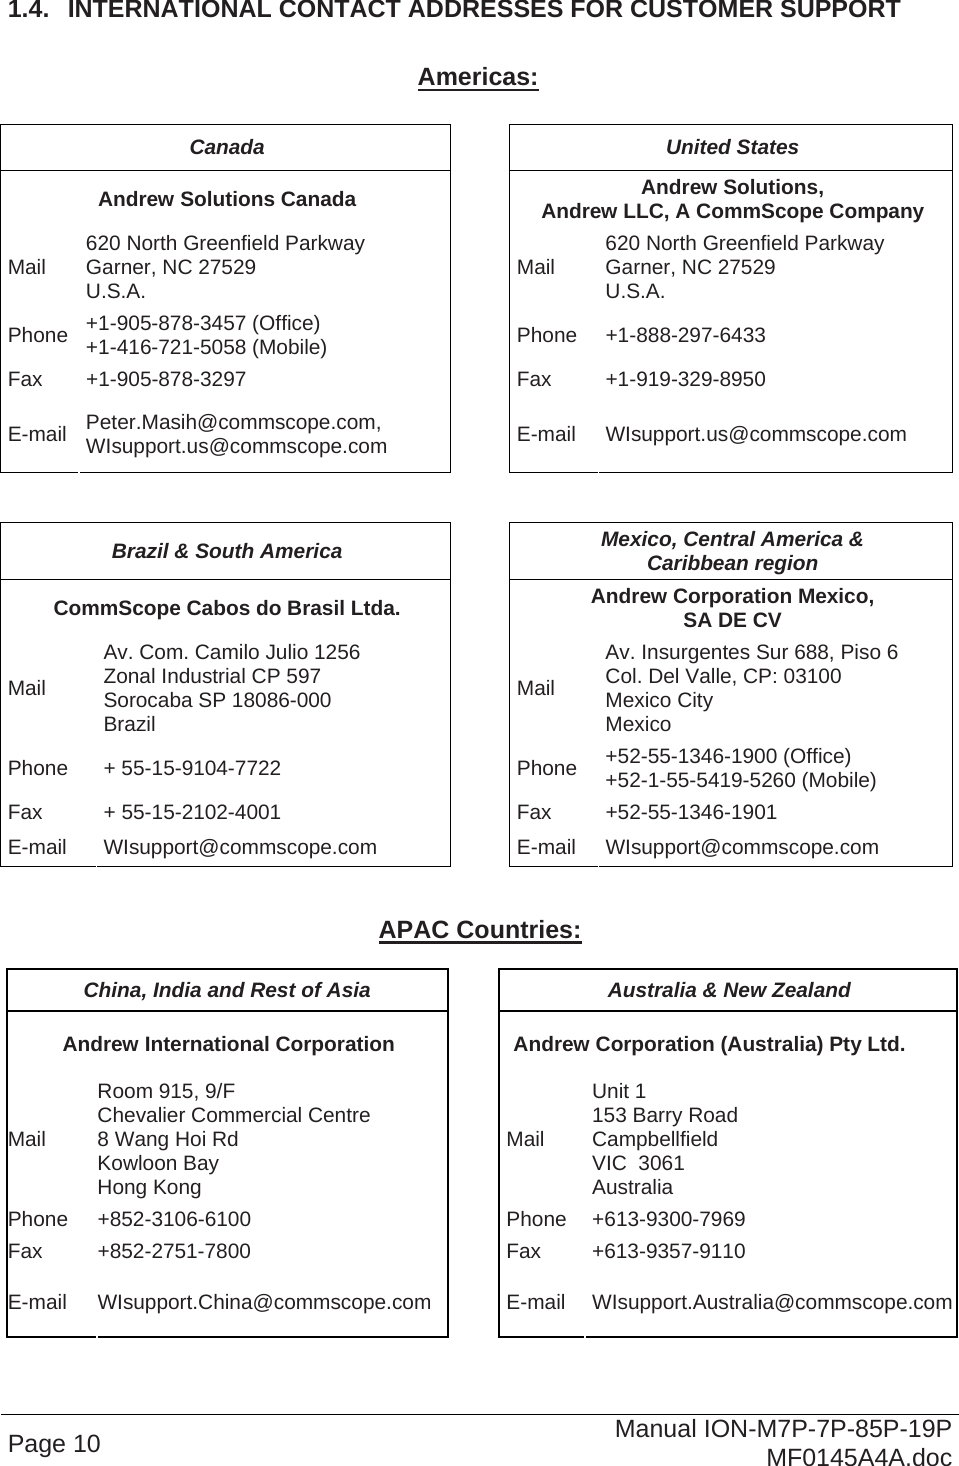  Page 10  Manual ION-M7P-7P-85P-19P MF0145A4A.doc 1.4.  INTERNATIONAL CONTACT ADDRESSES FOR CUSTOMER SUPPORT  Americas:  Canada United States Andrew Solutions Canada  Andrew Solutions,  Andrew LLC, A CommScope Company Mail  620 North Greenfield Parkway Garner, NC 27529 U.S.A.  Mail  620 North Greenfield Parkway Garner, NC 27529 U.S.A. Phone  +1-905-878-3457 (Office) +1-416-721-5058 (Mobile) Phone +1-888-297-6433 Fax +1-905-878-3297  Fax  +1-919-329-8950 E-mail  Peter.Masih@commscope.com, WIsupport.us@commscope.com  E-mail WIsupport.us@commscope.com   Brazil &amp; South America  Mexico, Central America &amp;  Caribbean region CommScope Cabos do Brasil Ltda.  Andrew Corporation Mexico,  SA DE CV Mail Av. Com. Camilo Julio 1256 Zonal Industrial CP 597 Sorocaba SP 18086-000 Brazil Mail Av. Insurgentes Sur 688, Piso 6 Col. Del Valle, CP: 03100 Mexico City Mexico Phone + 55-15-9104-7722  Phone +52-55-1346-1900 (Office) +52-1-55-5419-5260 (Mobile) Fax + 55-15-2102-4001  Fax +52-55-1346-1901 E-mail WIsupport@commscope.com  E-mail WIsupport@commscope.com   APAC Countries:  China, India and Rest of Asia  Australia &amp; New Zealand Andrew International Corporation  Andrew Corporation (Australia) Pty Ltd. Mail Room 915, 9/F  Chevalier Commercial Centre 8 Wang Hoi Rd Kowloon Bay  Hong Kong Mail Unit 1 153 Barry Road Campbellfield  VIC  3061 Australia Phone +852-3106-6100  Phone +613-9300-7969 Fax +852-2751-7800  Fax +613-9357-9110 E-mail WIsupport.China@commscope.com  E-mail WIsupport.Australia@commscope.com 